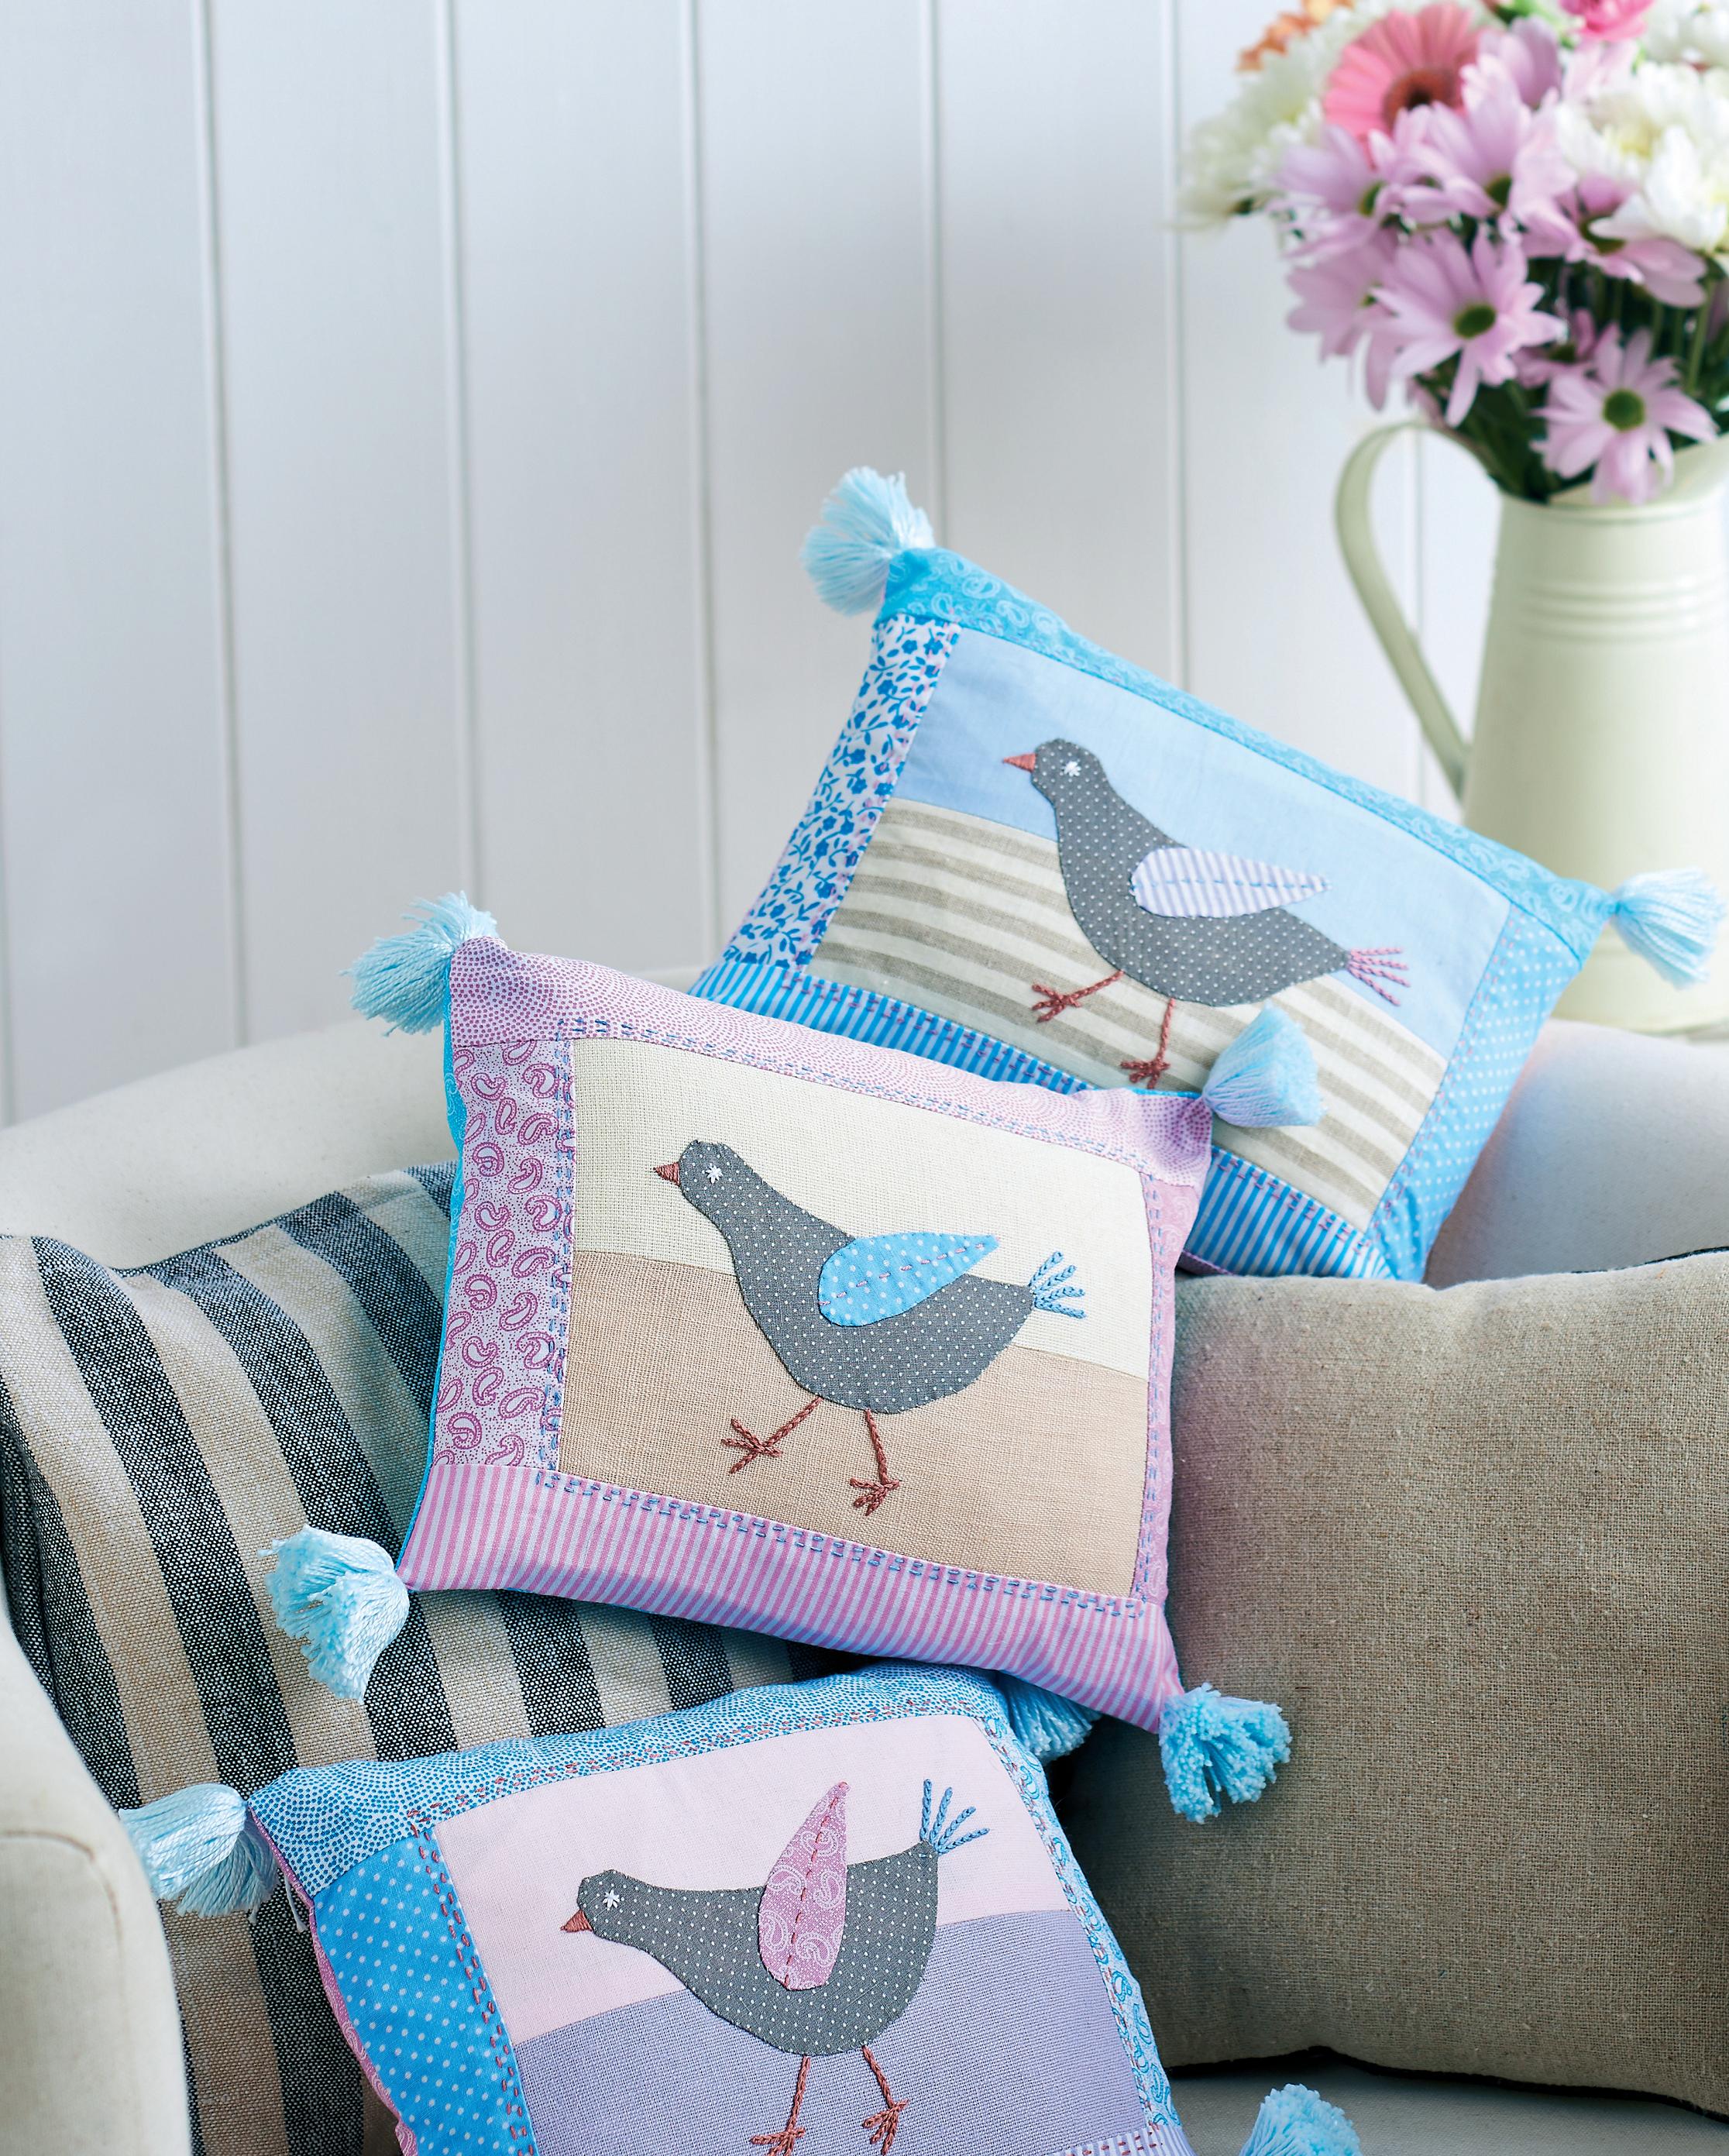 Applique Bird Cushions with Pom Poms Free sewing patterns Sew Magazine